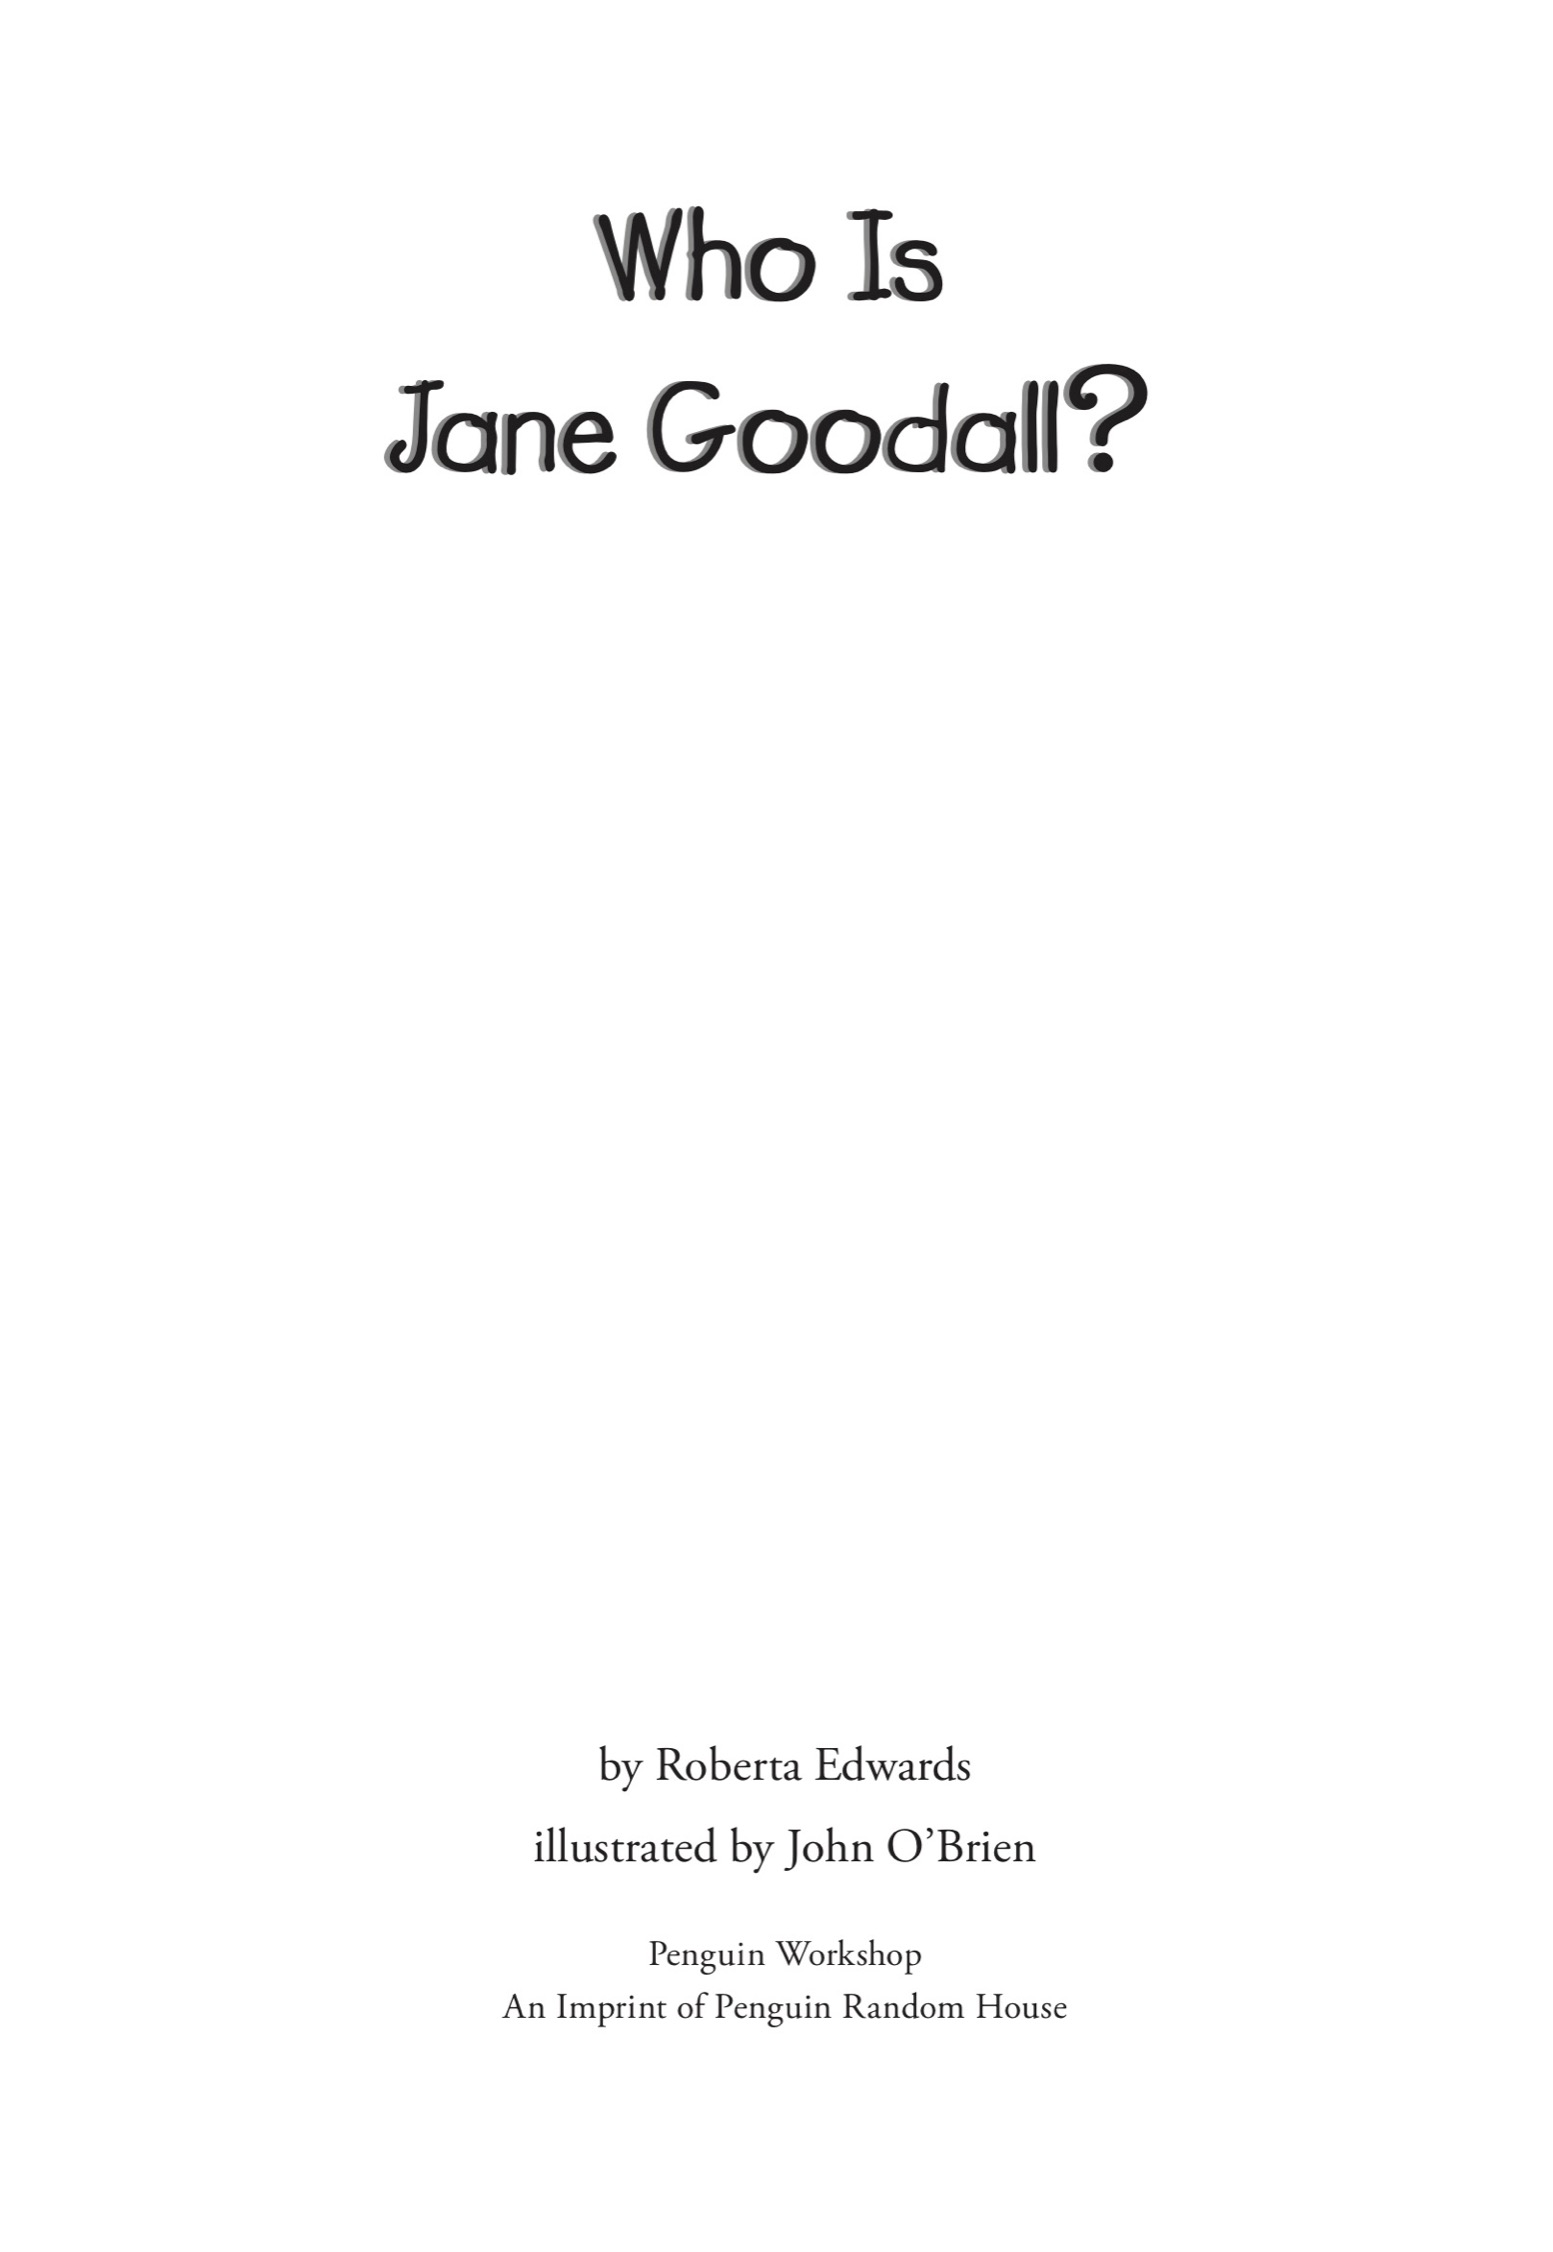 Title Page for Who Is Jane Goodall?